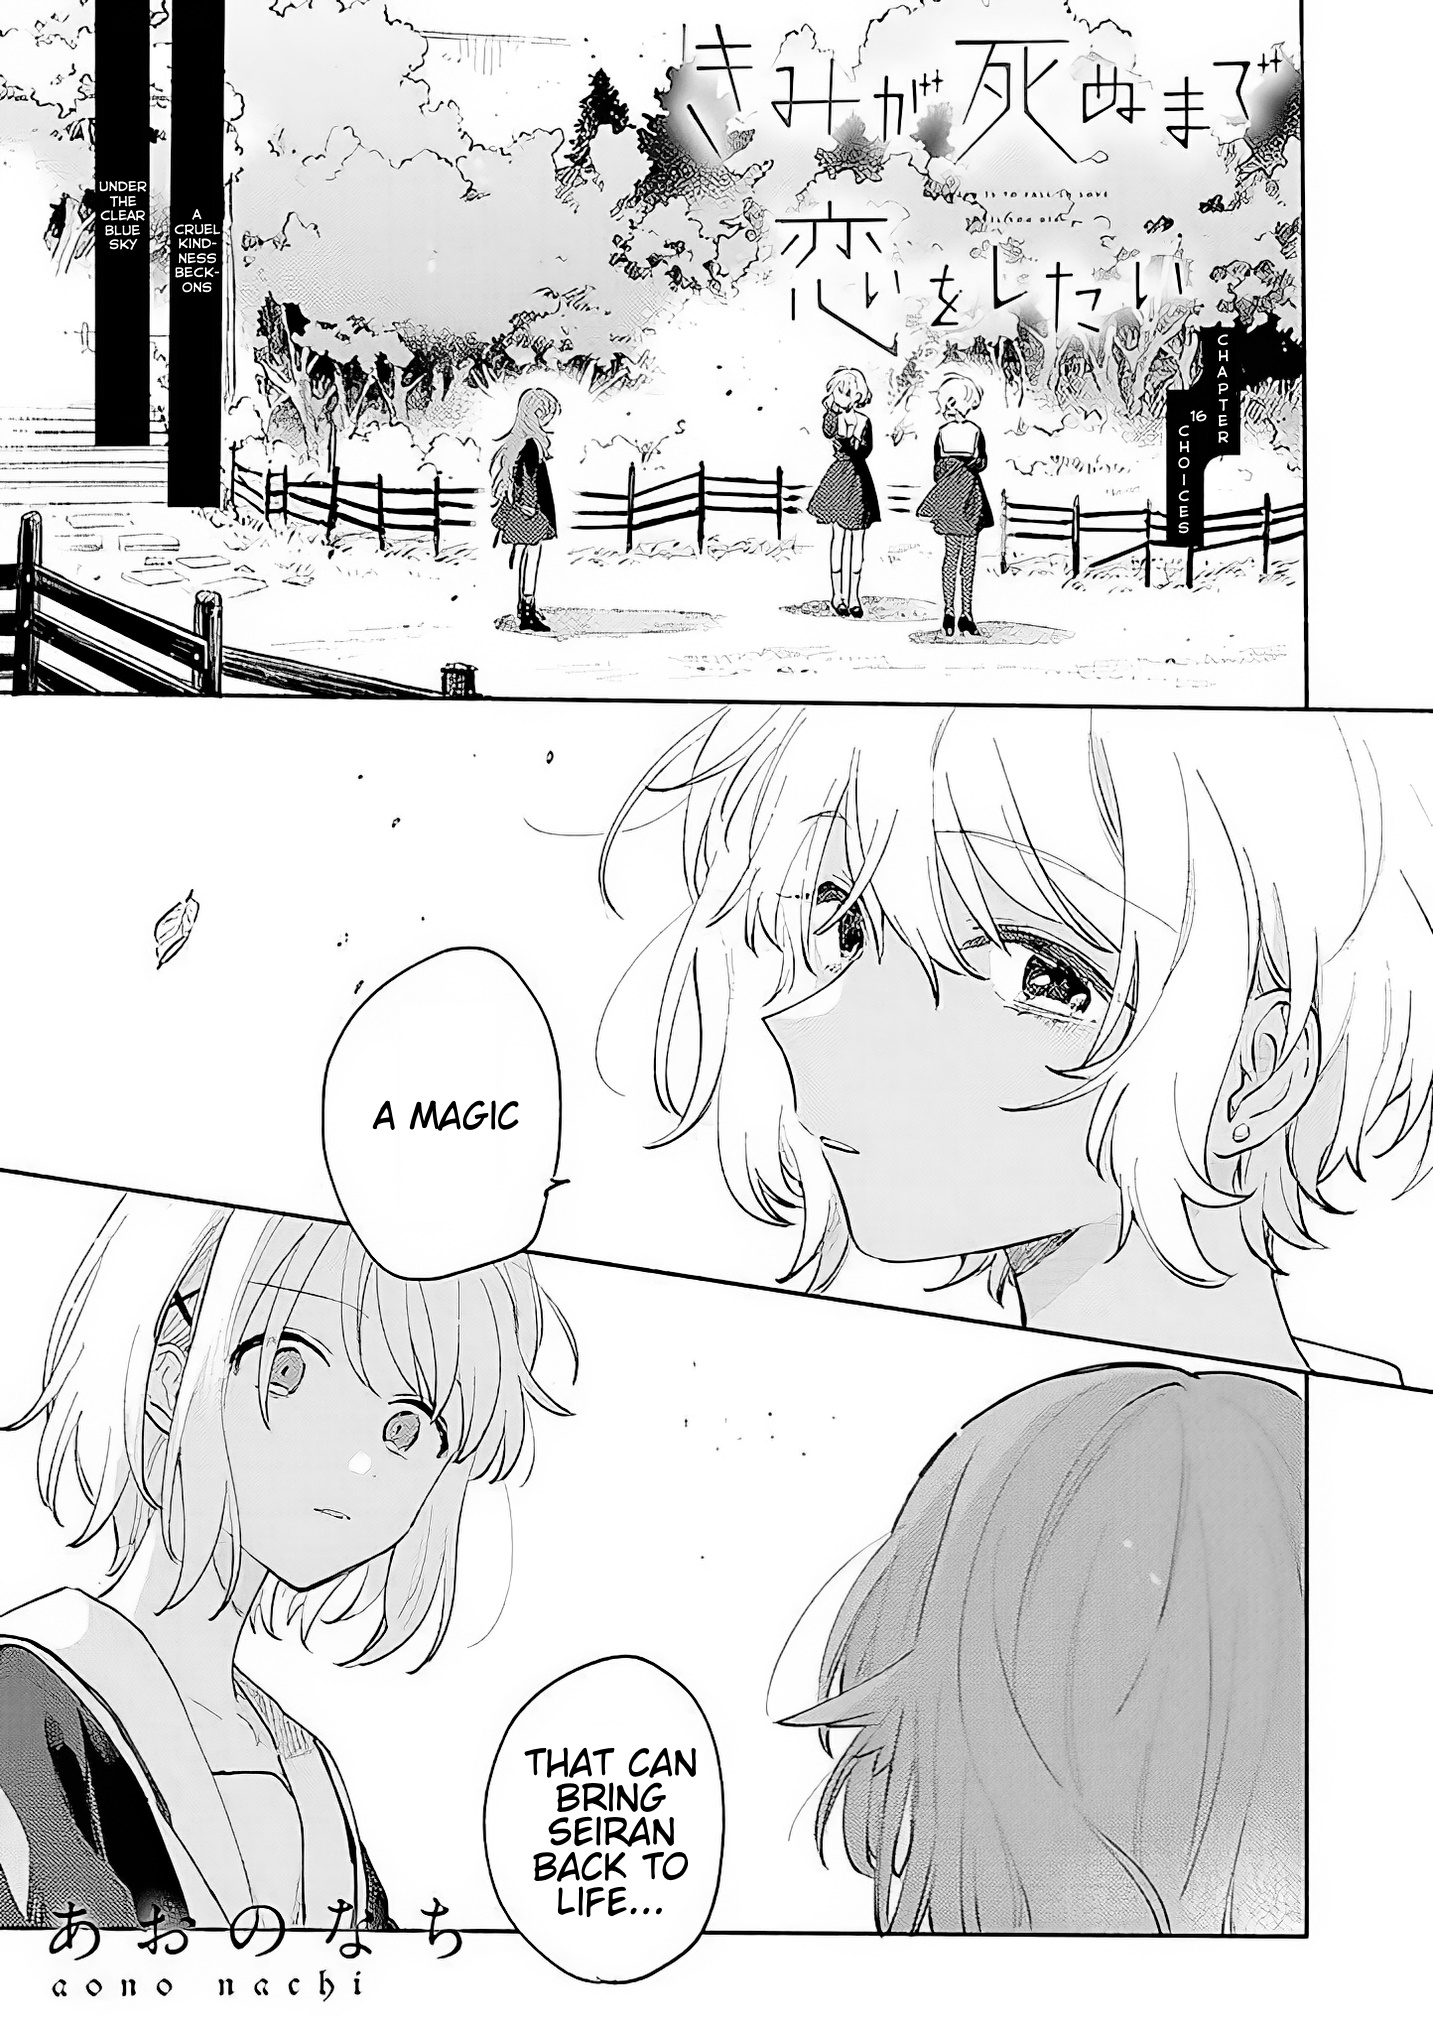 My Wish Is To Fall In Love Until You Die Vol.4 Chapter 16